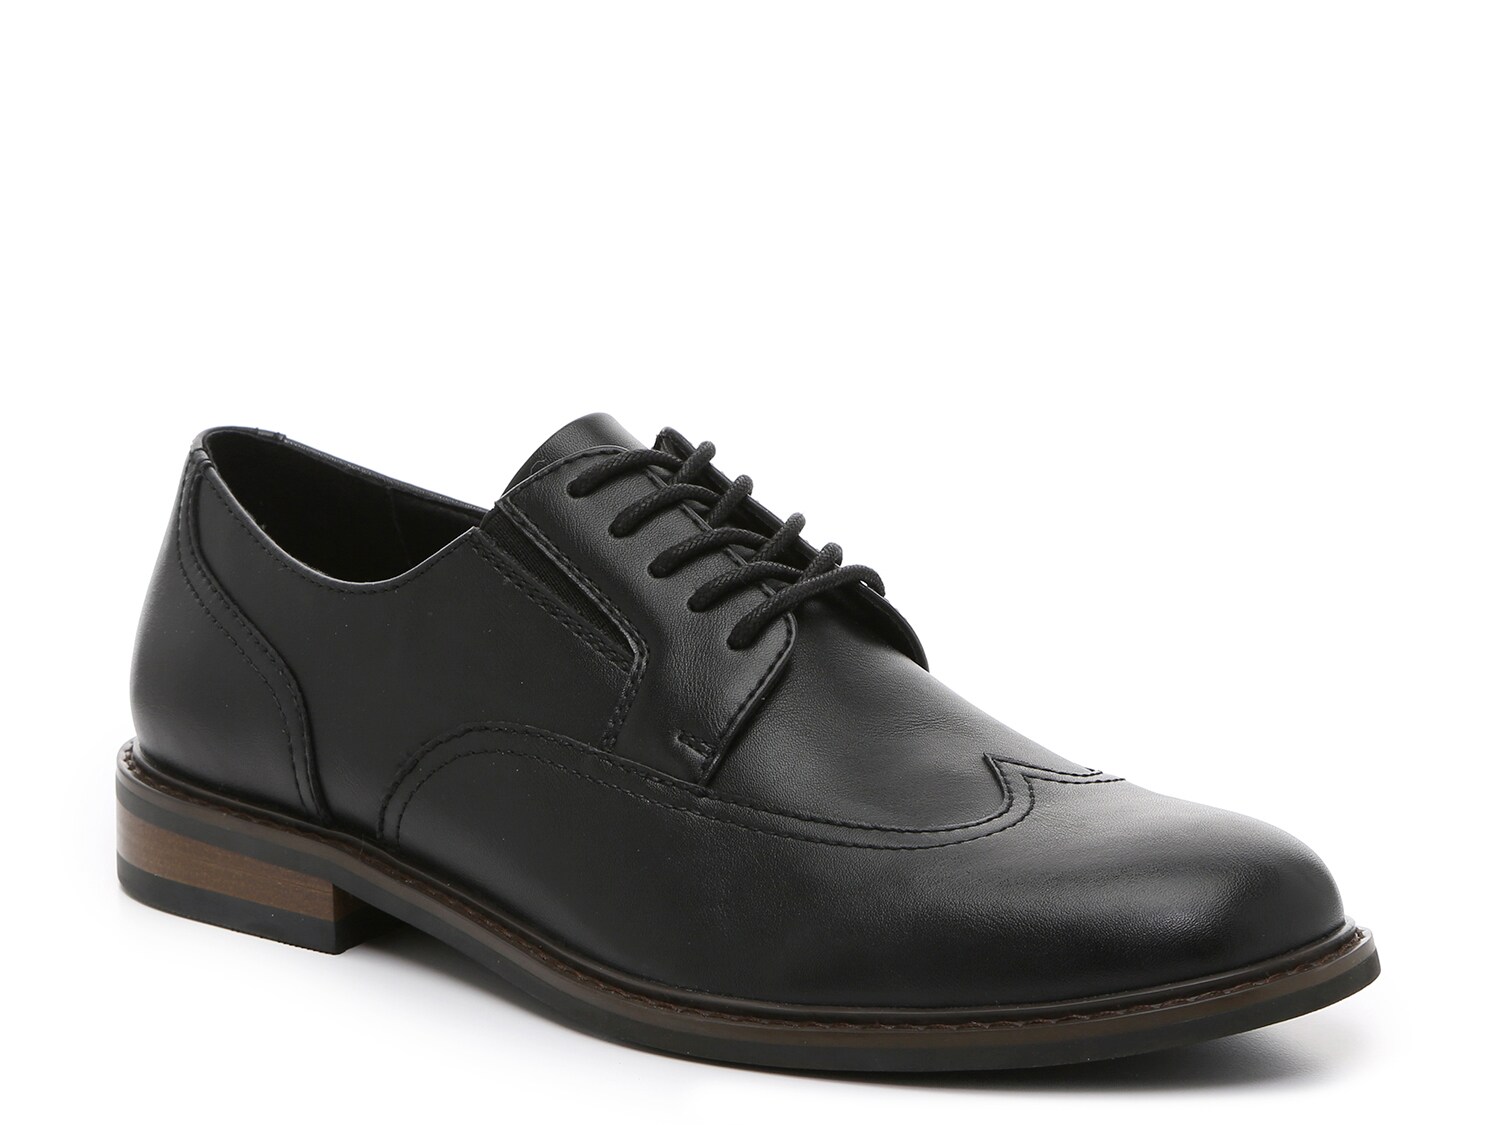 mens dress shoes clearance